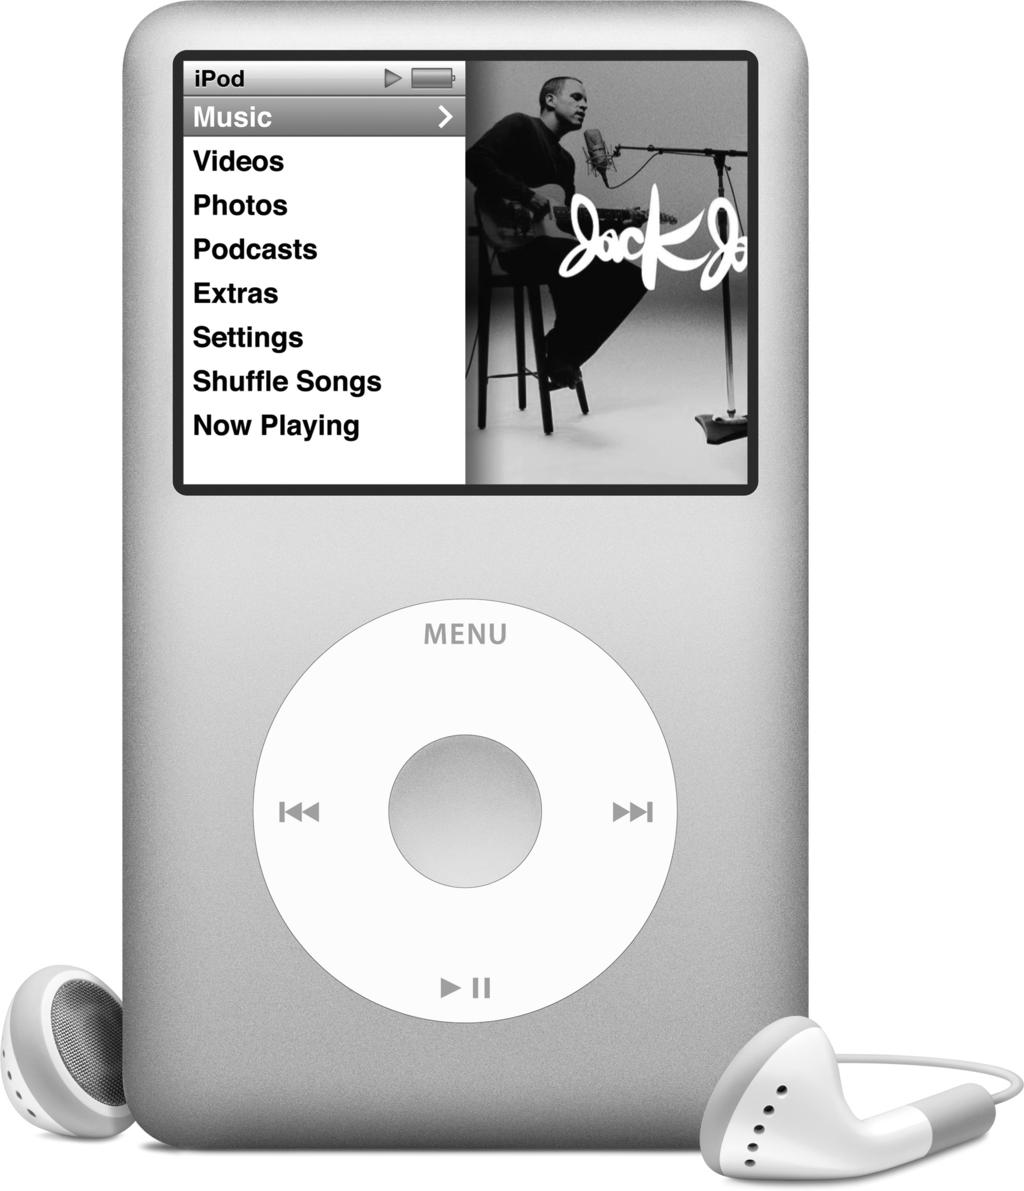 Chapter 3 Enjoy Music and Video on the ipod or iphone 67 The title bar at the top of the display shows the title of the current screen for example, ipod for the main menu (the top-level menu), Now